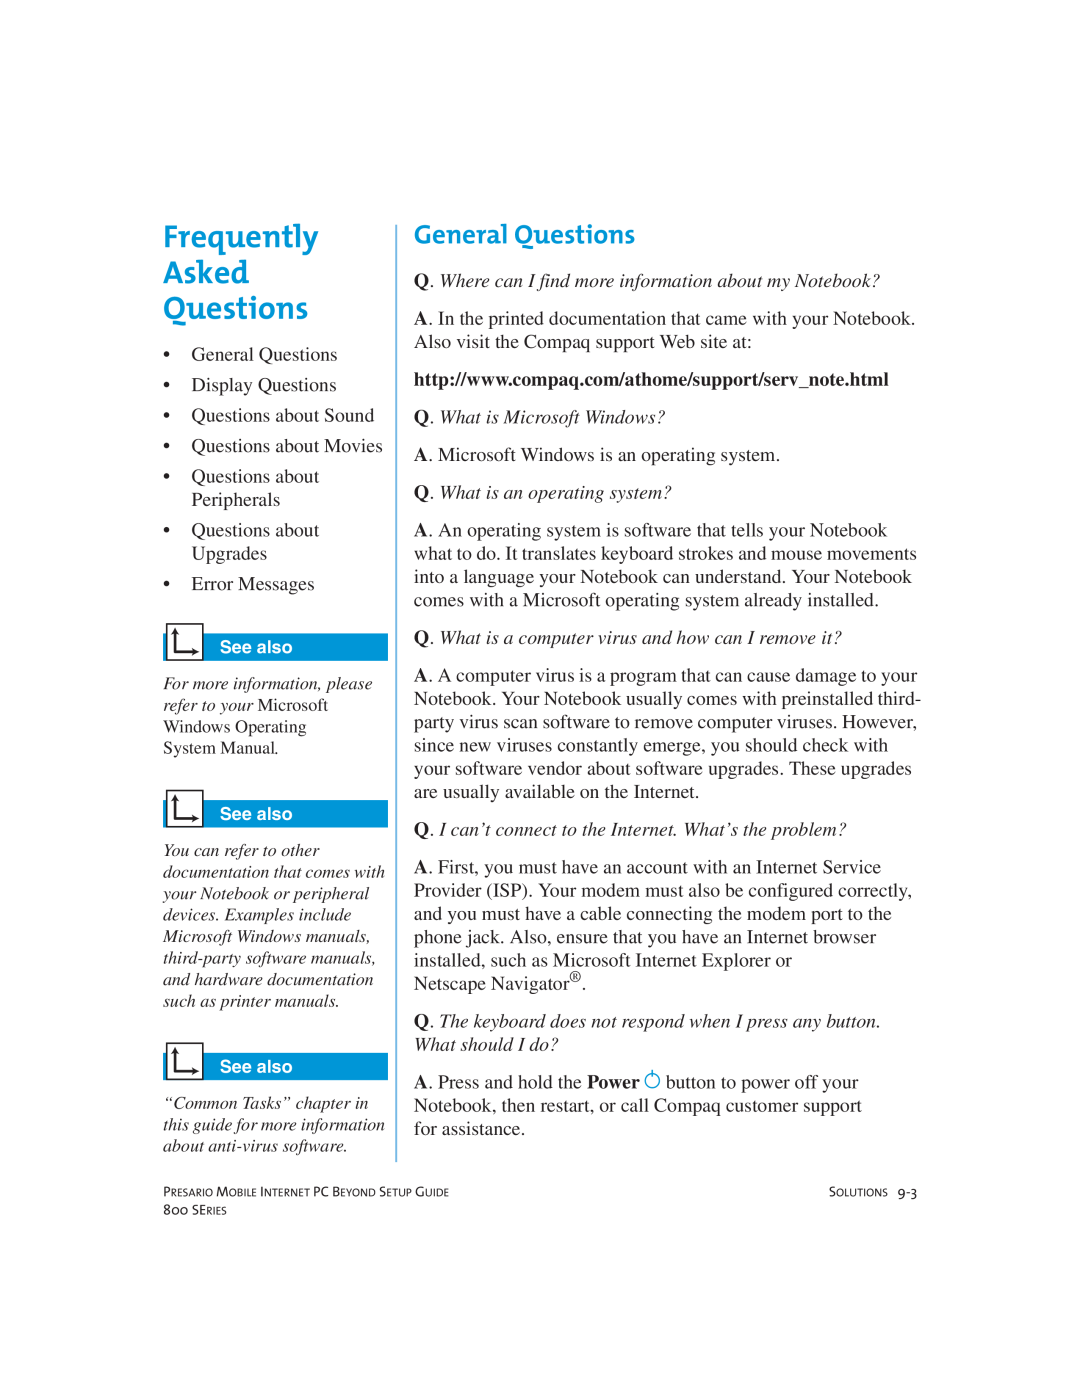 Compaq 800 manual Frequently Asked Questions, General Questions 